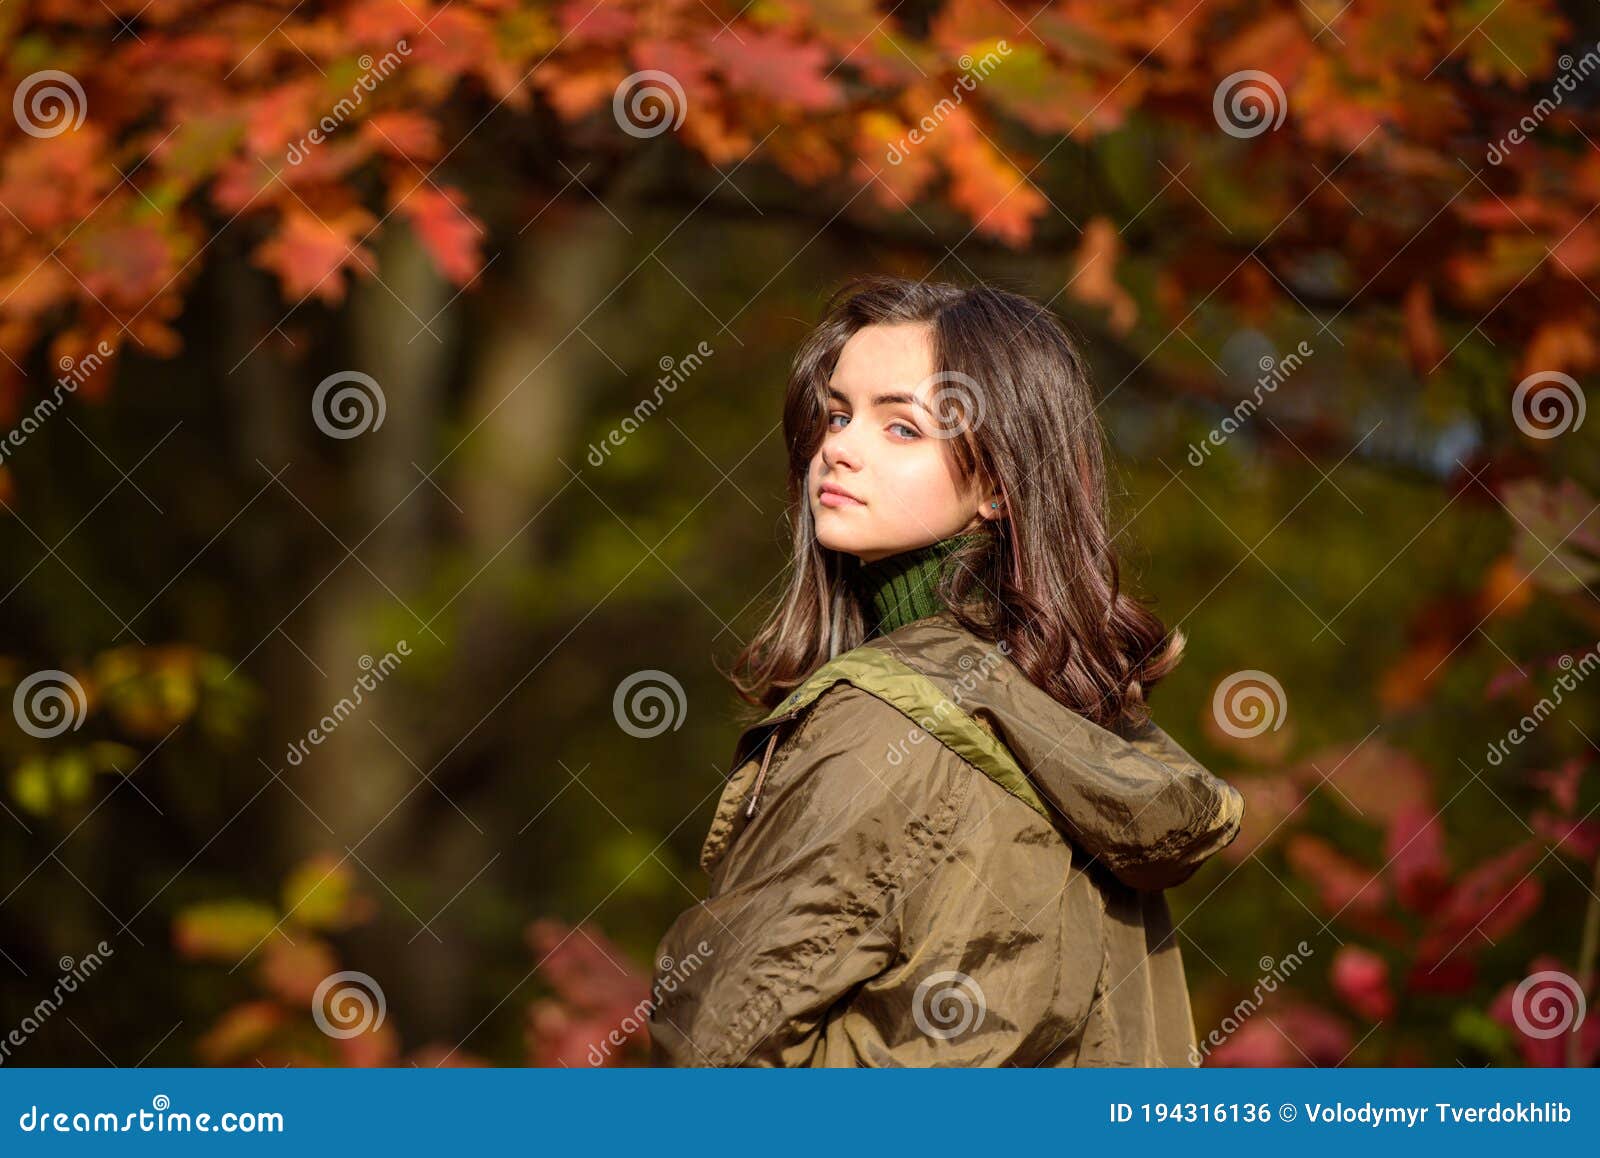 Teenager Girl on Autumn Red Maple Leaves at Fall Outdoors. Portrait of ...